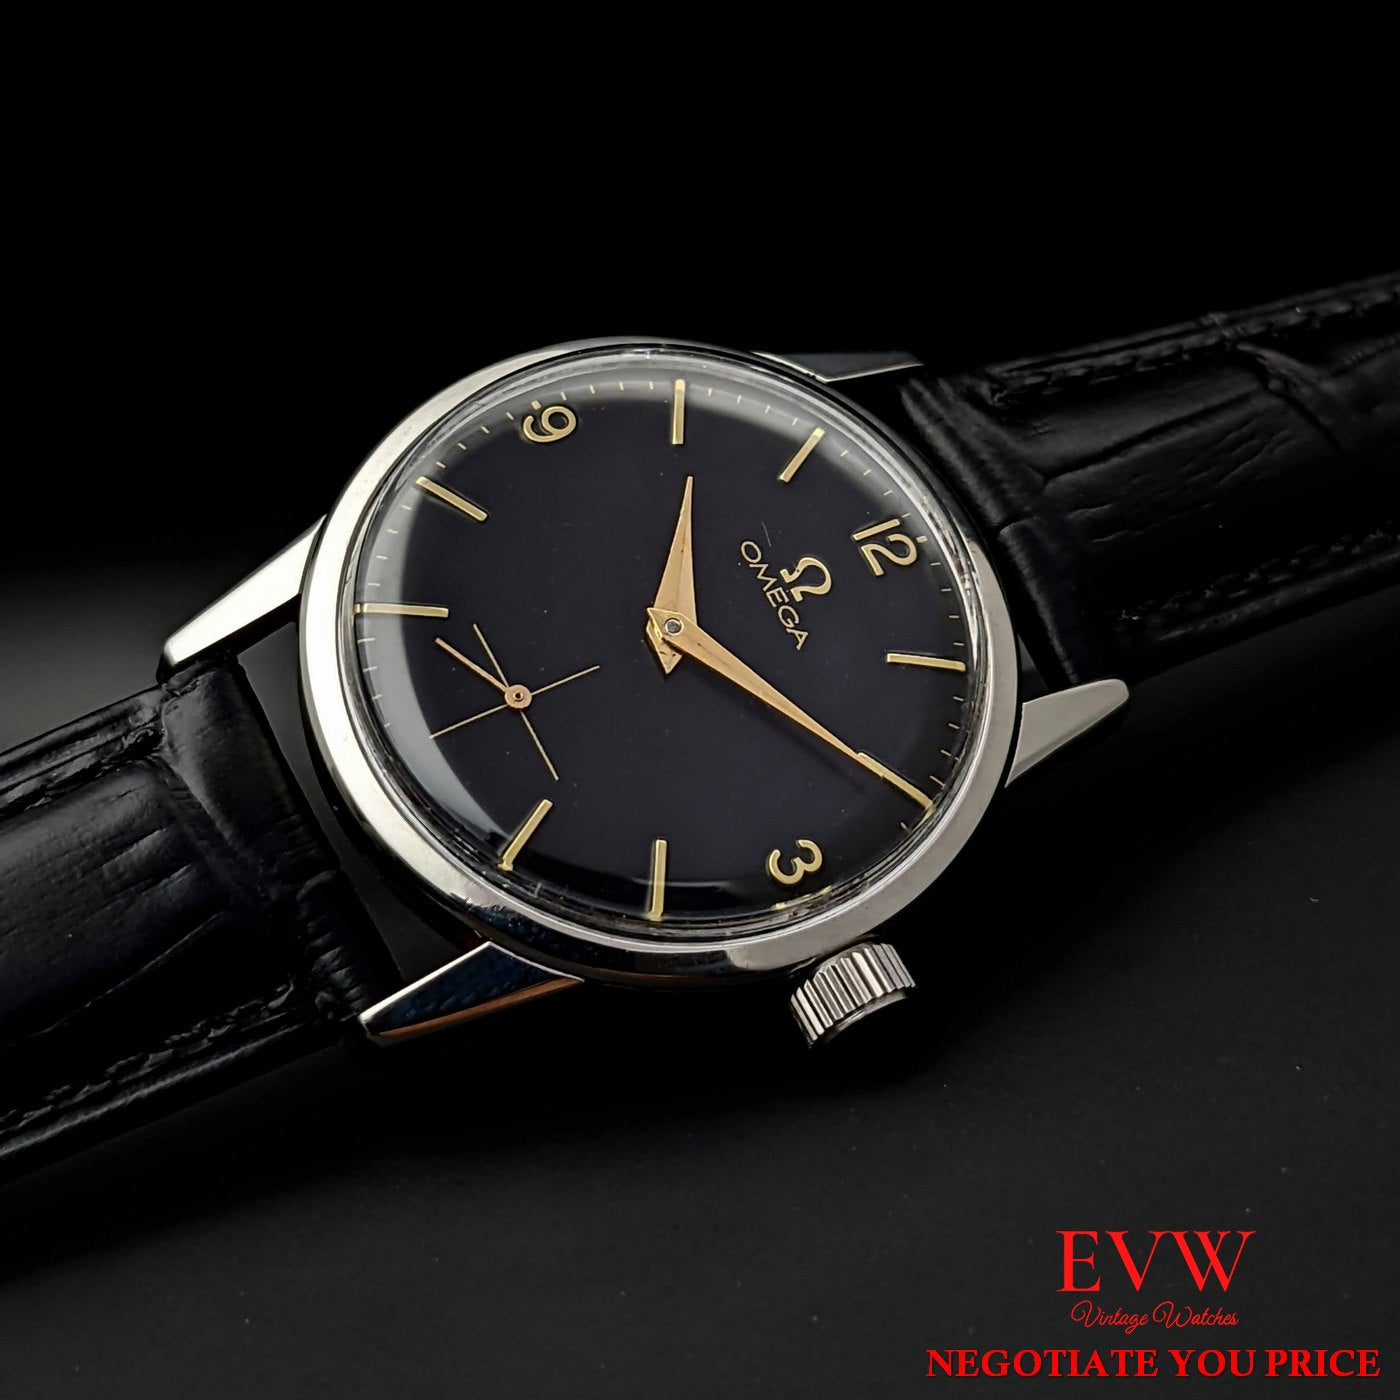 Weristwatch Omega cailber 269 / reference Ref.14713-61